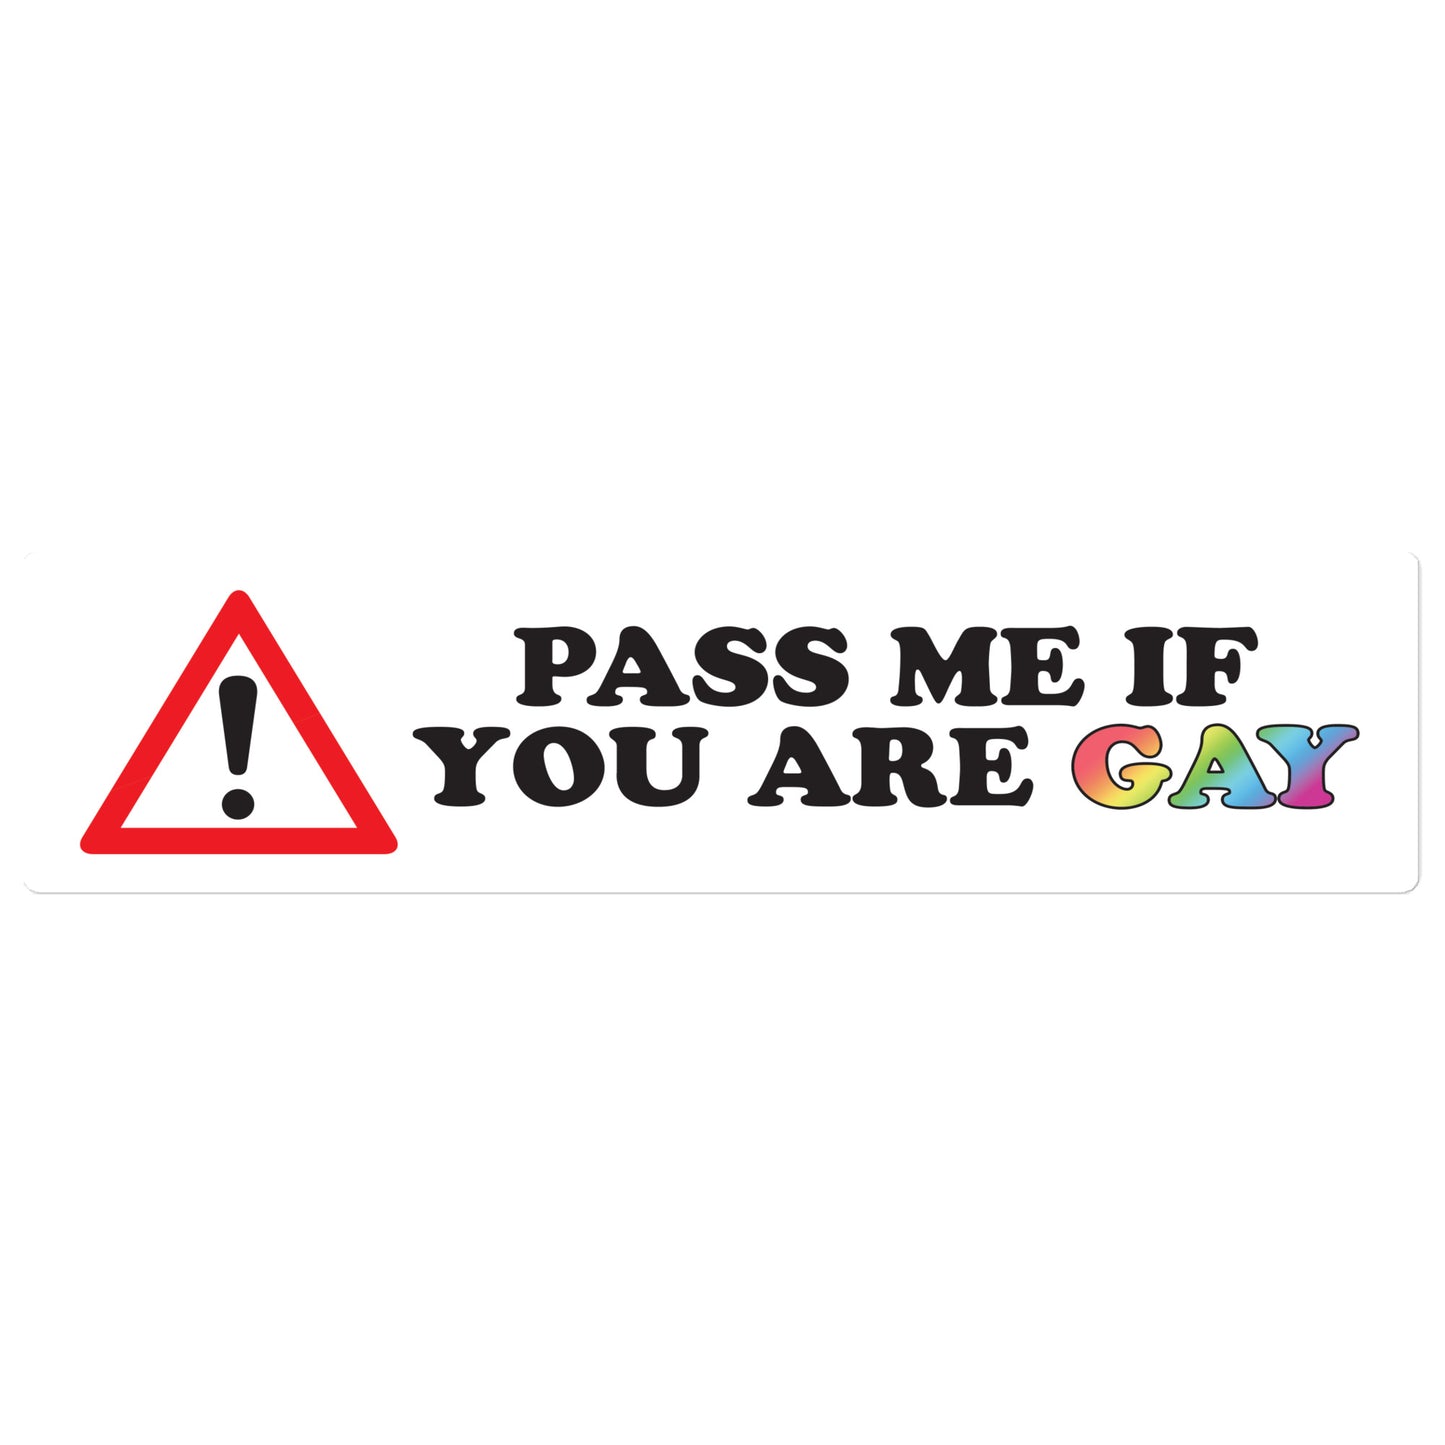 Pass Me If You Are Gay bumper sticker